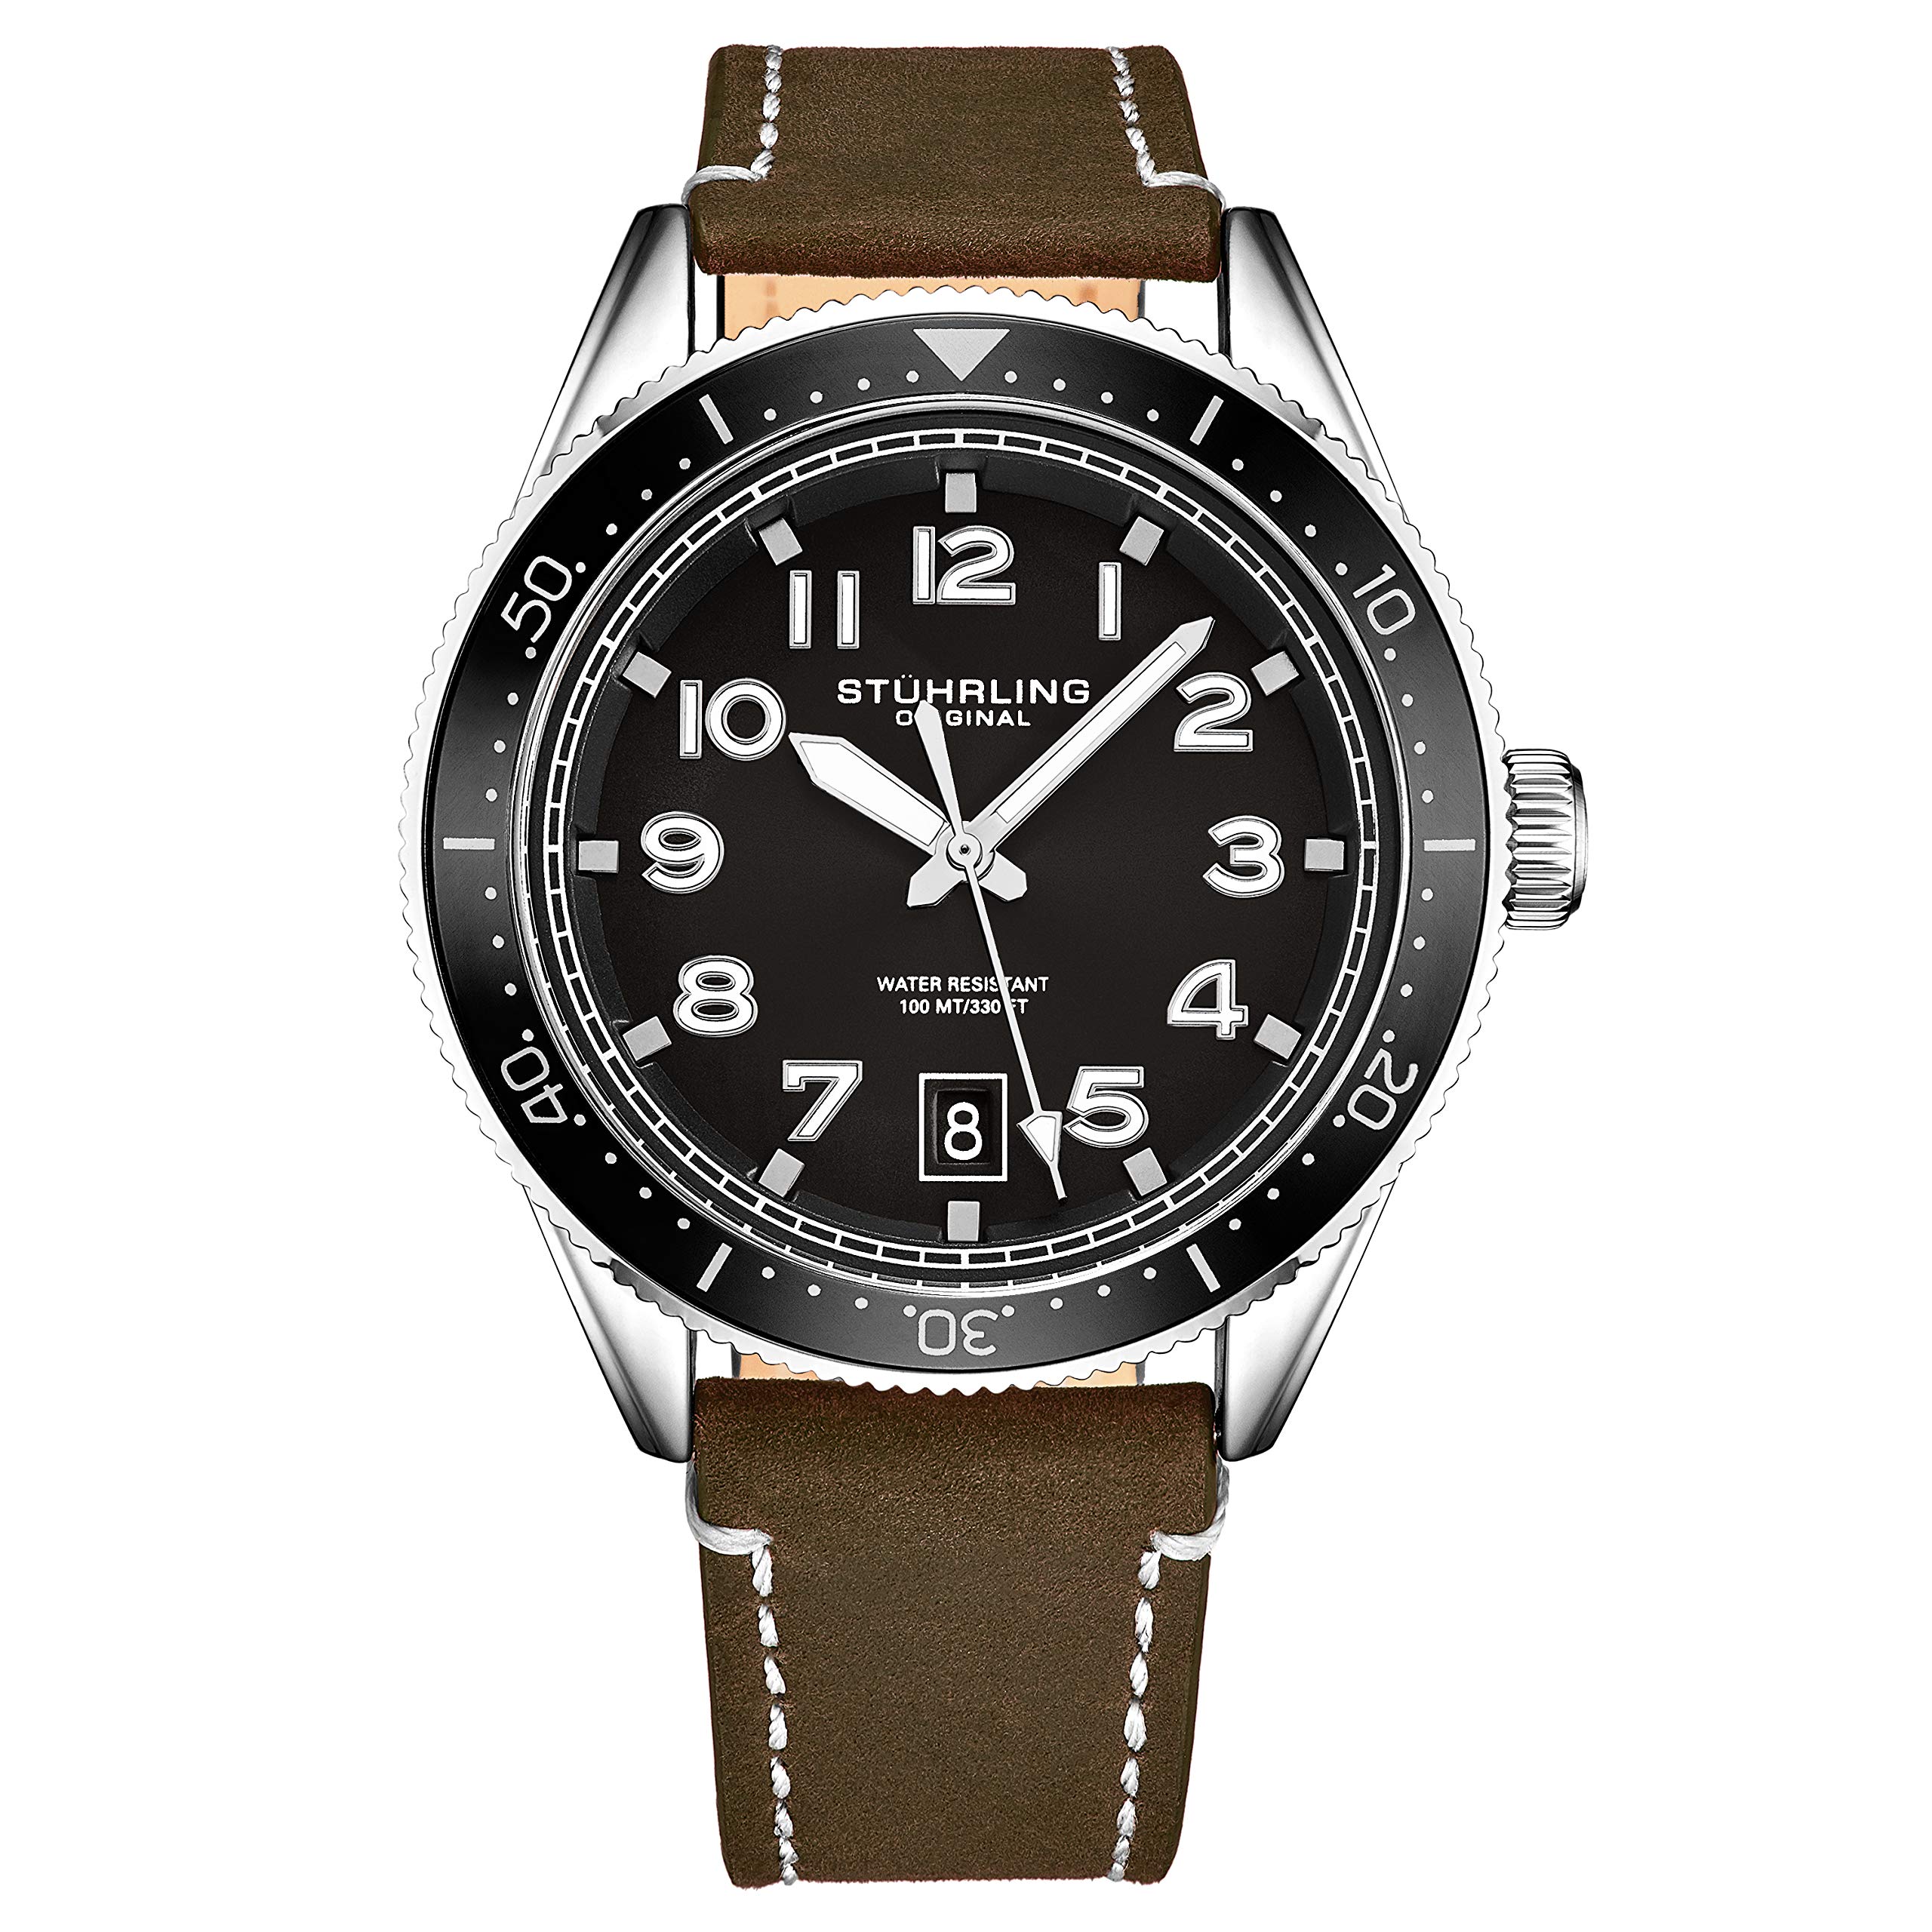 Stuhrling Original Mens Leather Dress Watch -Aviation Analog Watch with Date Leather Strap Mens Wrist Watches